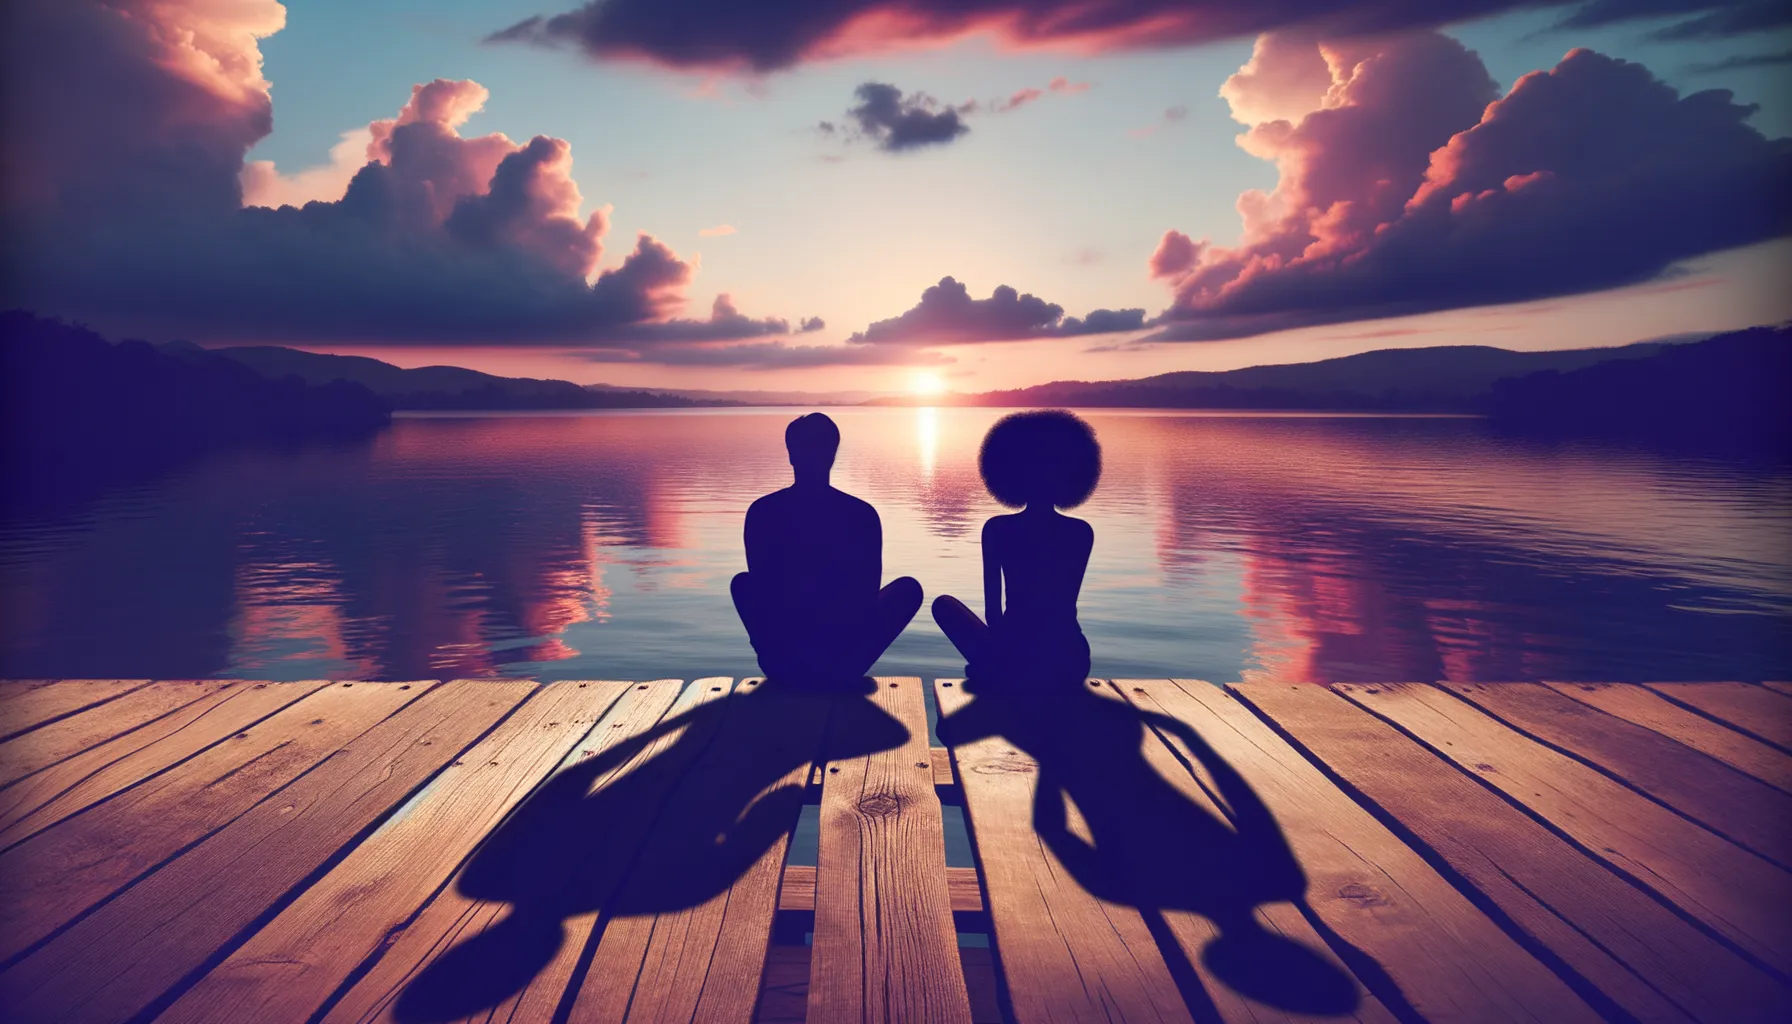 In the quietude of sunset, two souls merge in serene reflection, their shared silhouette a testament to the bonds forged through time and togetherness, echoing the harmony sought by men in their fifties.